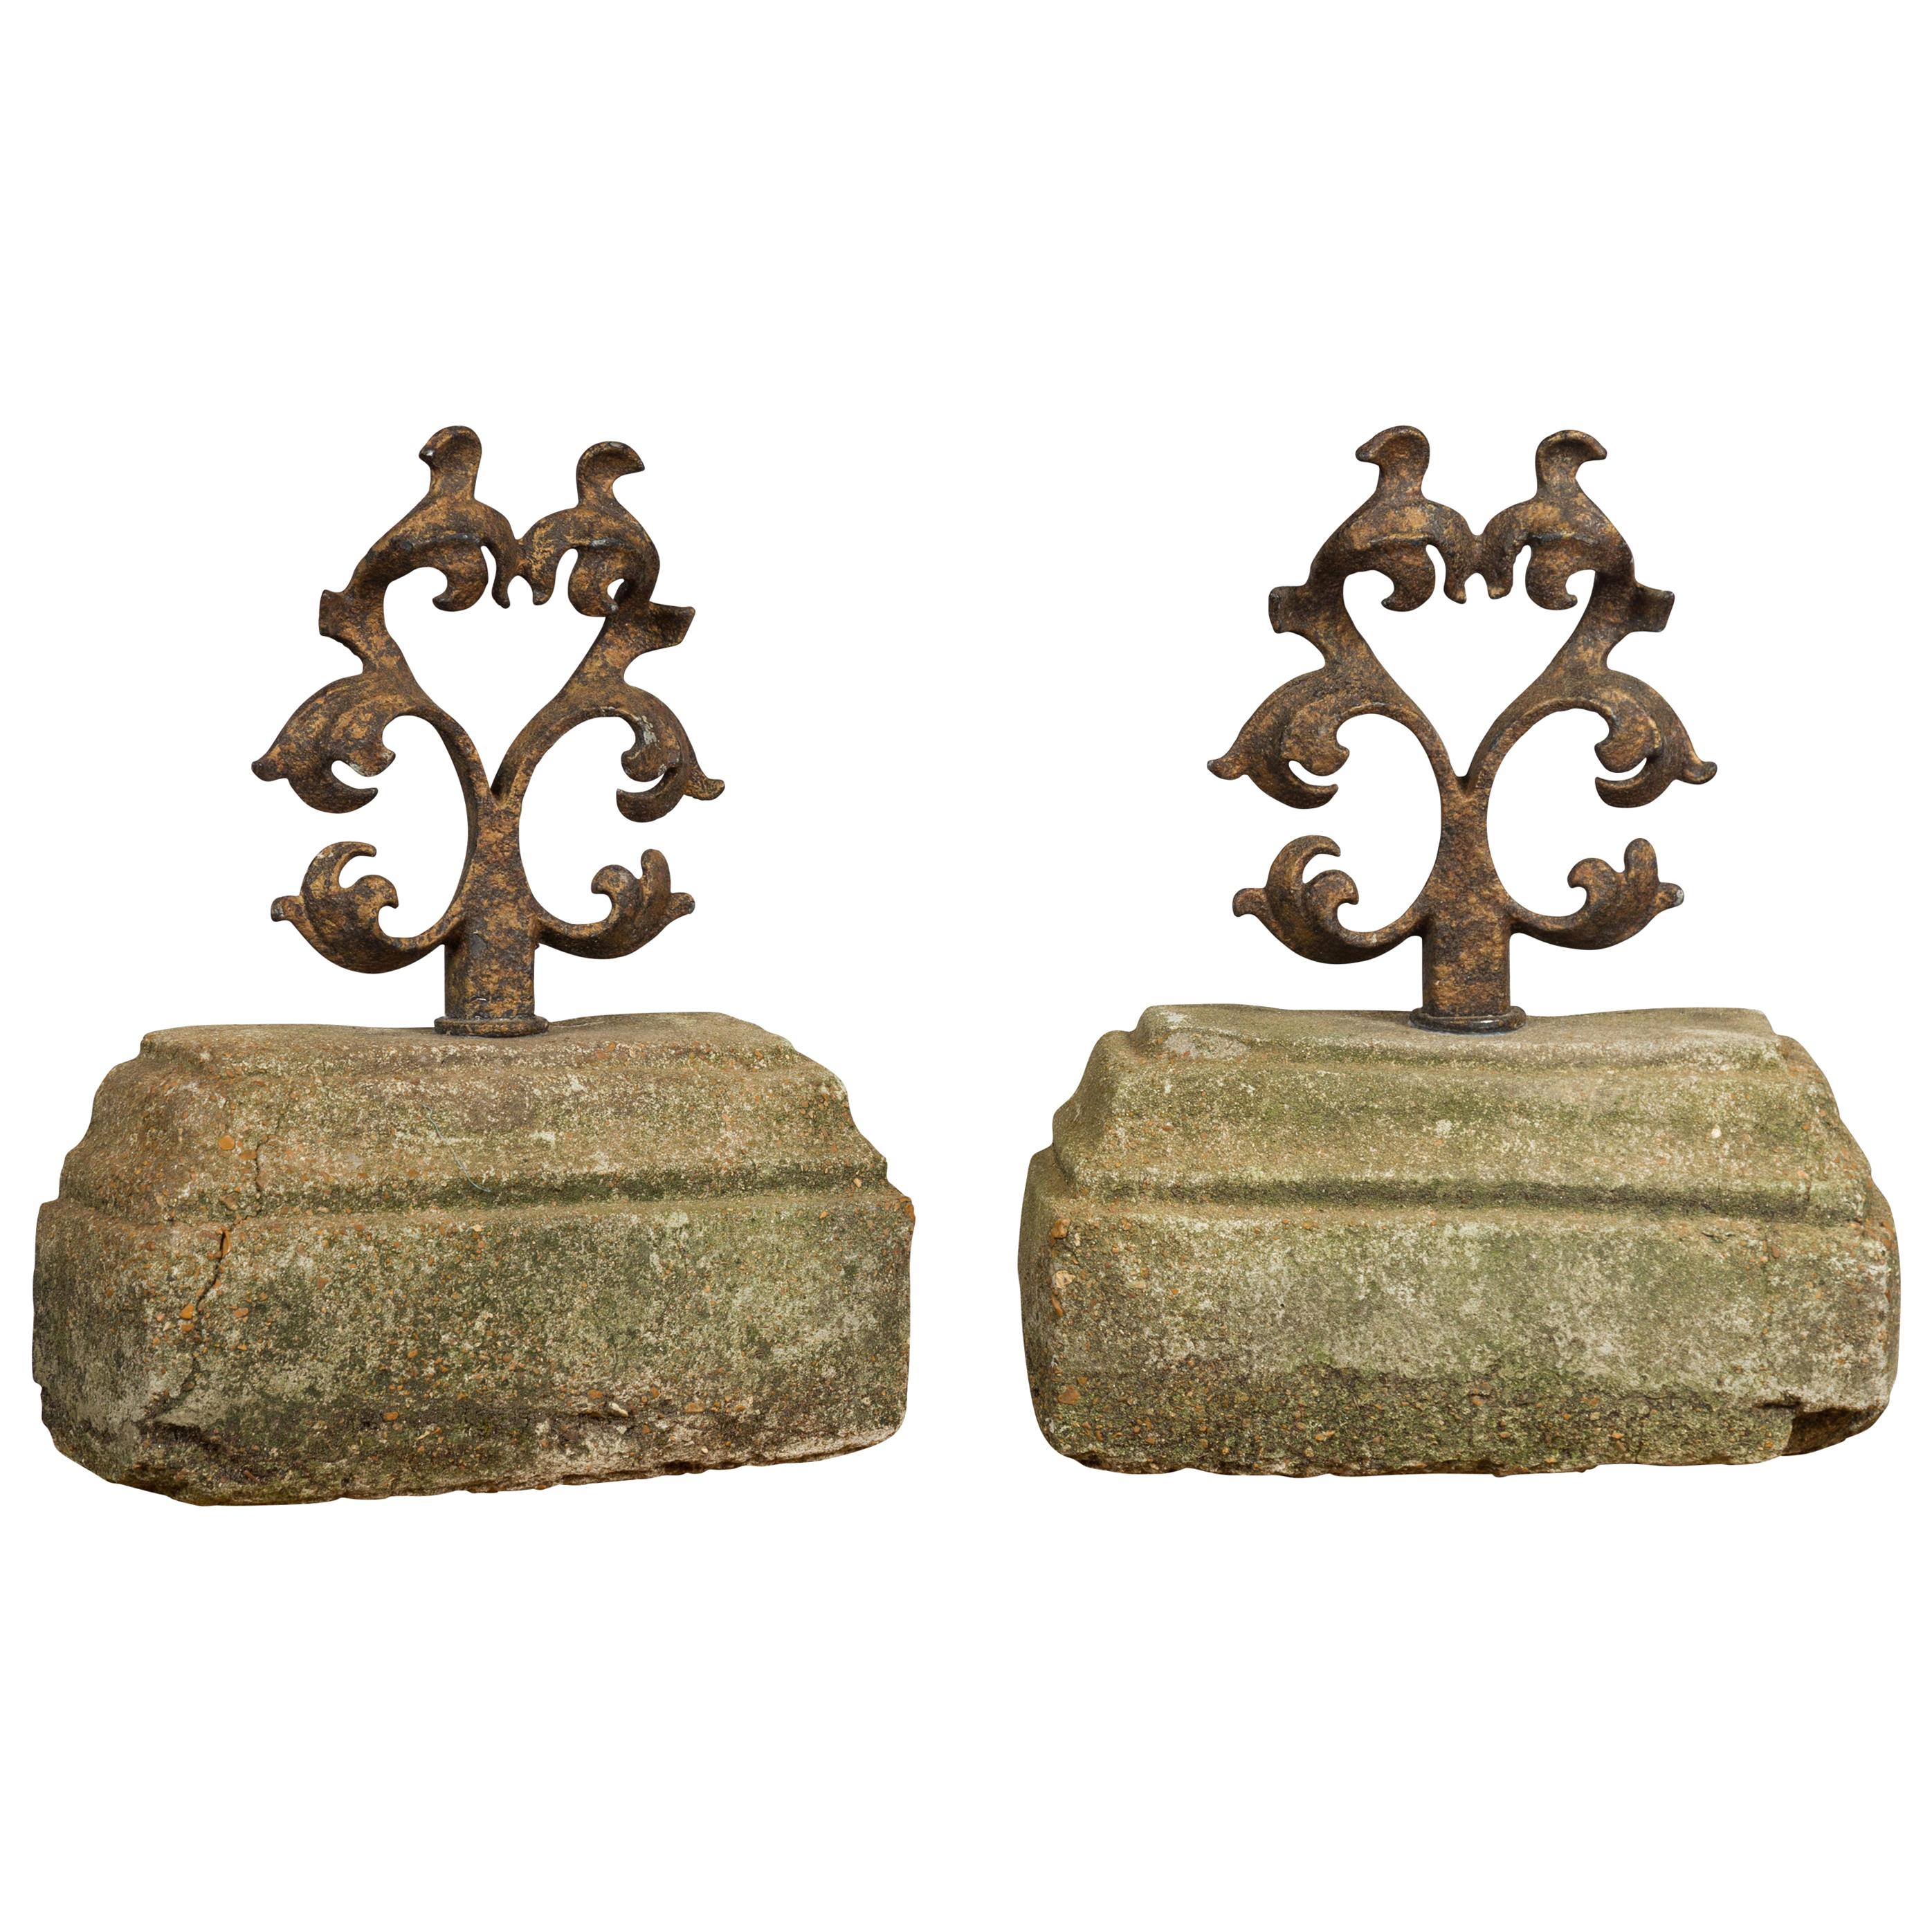 Pair of English Turn of the Century Iron and Stone Door Stops/Boot Scrappers